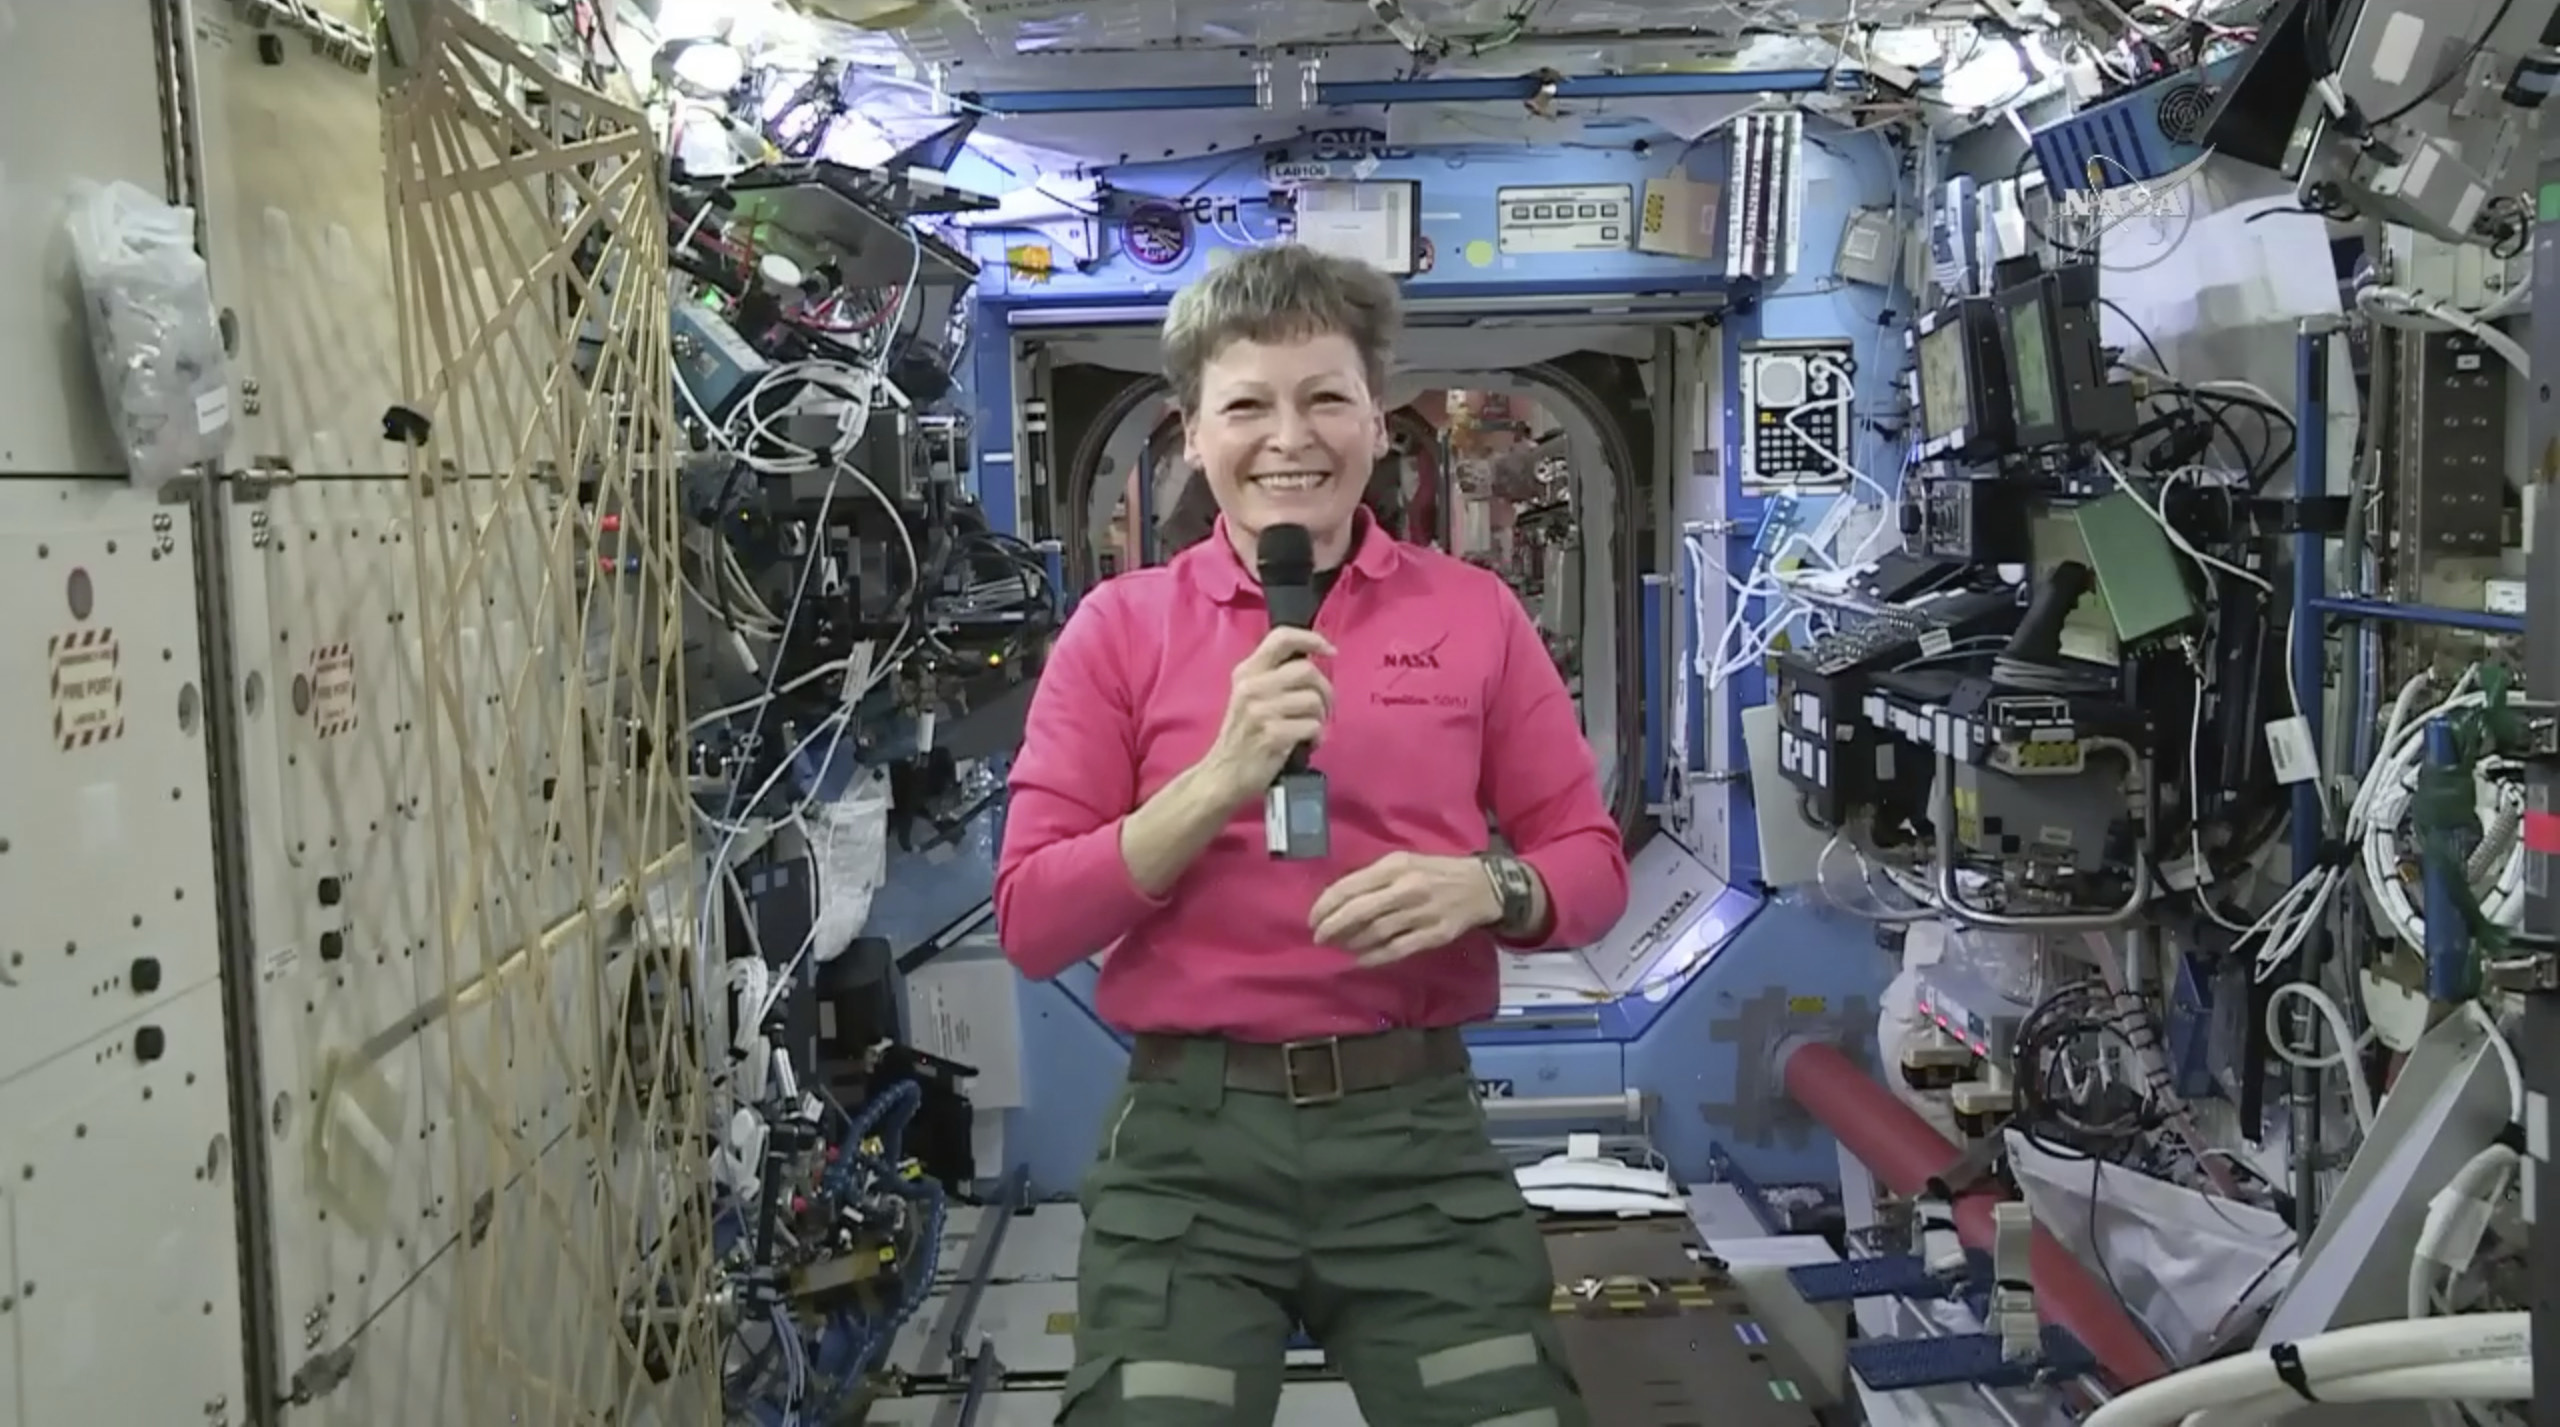 We’re Ignoring Women Astronauts’ Health At Our Peril